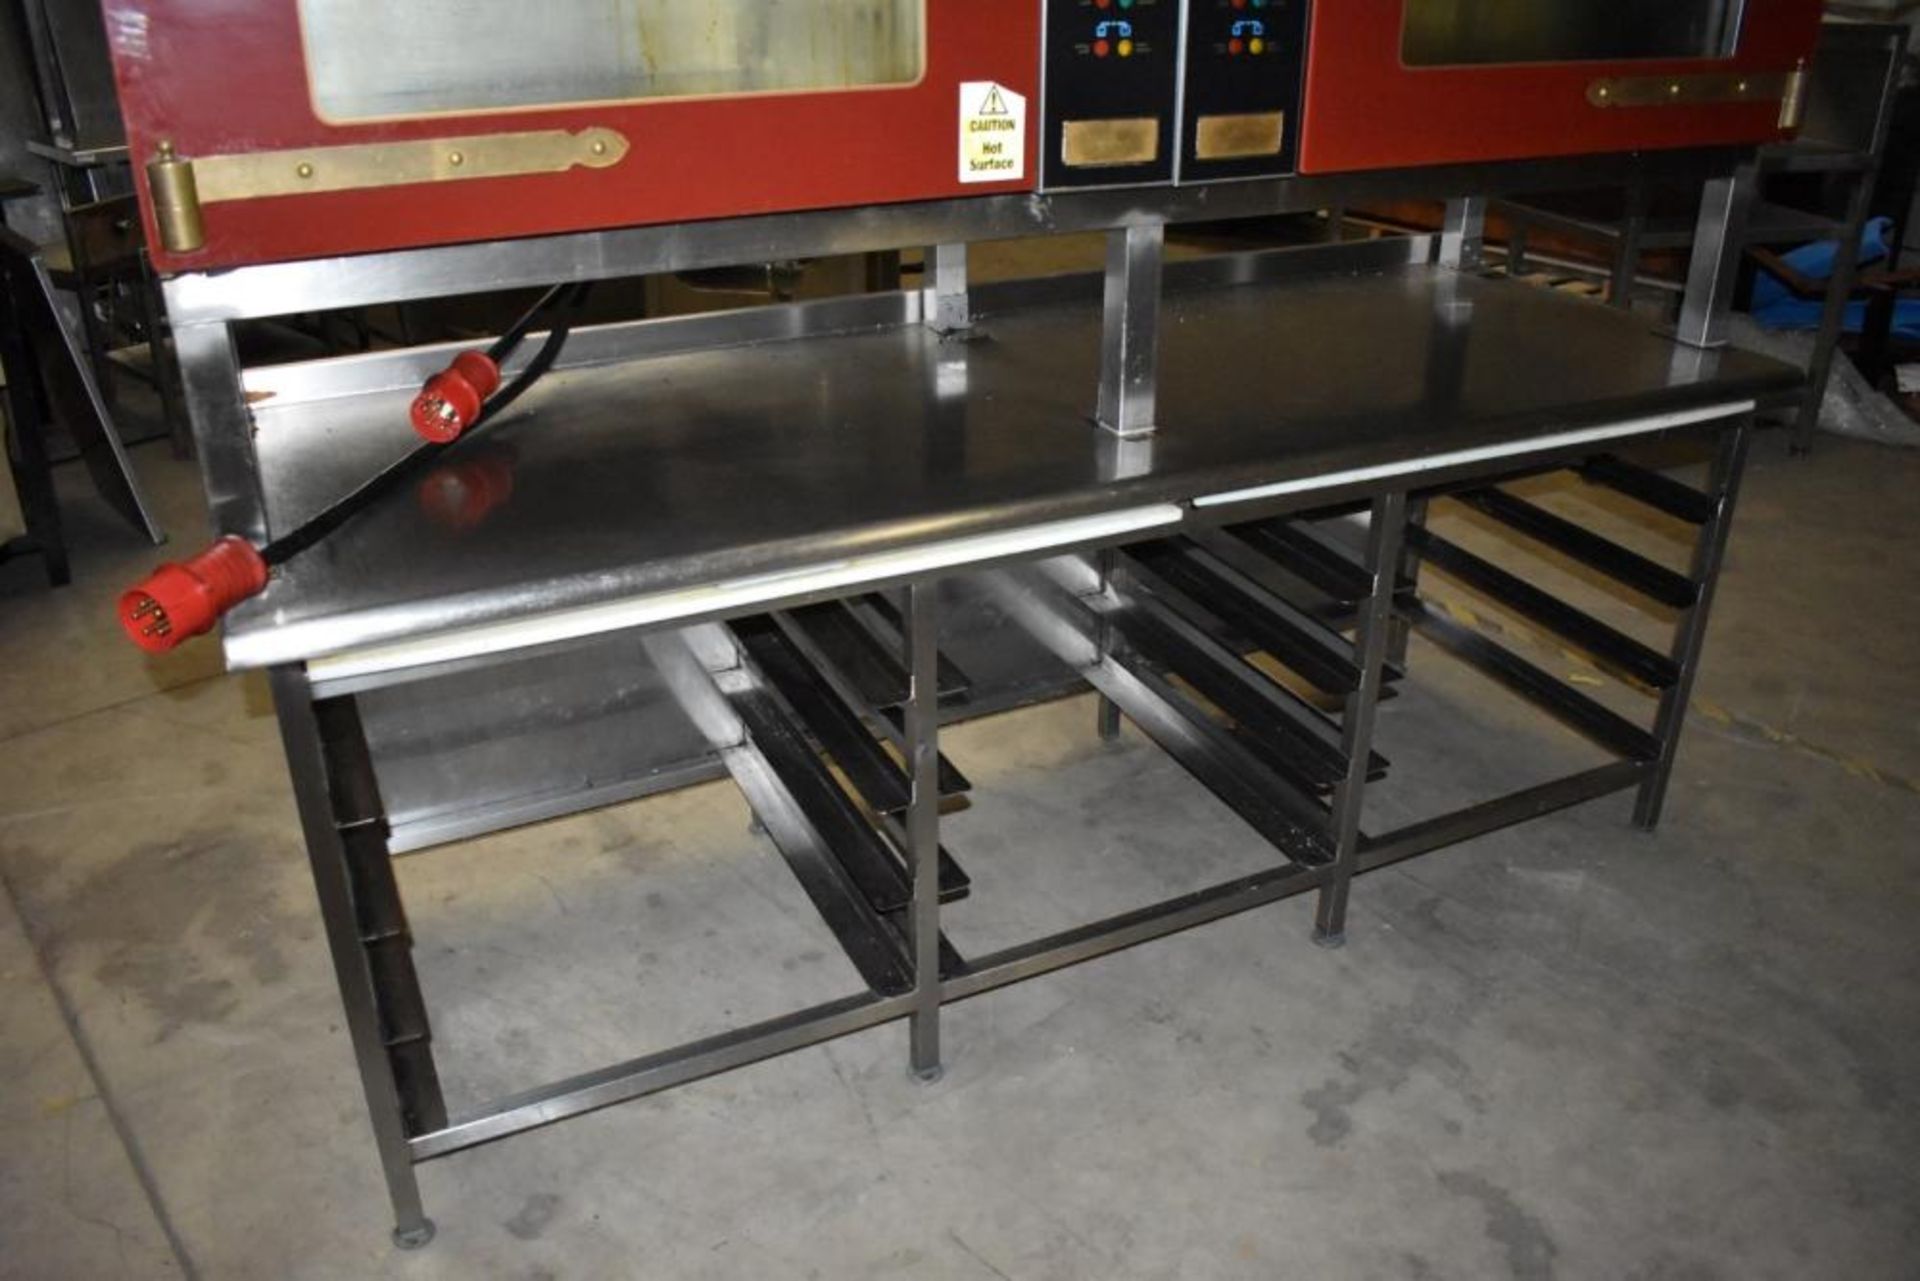 1 x Tom Chandley Double C5 60X40 Pie Oven With Stainless Steel Baking Tray Prep Bench - CL455 - Ref - Image 14 of 18